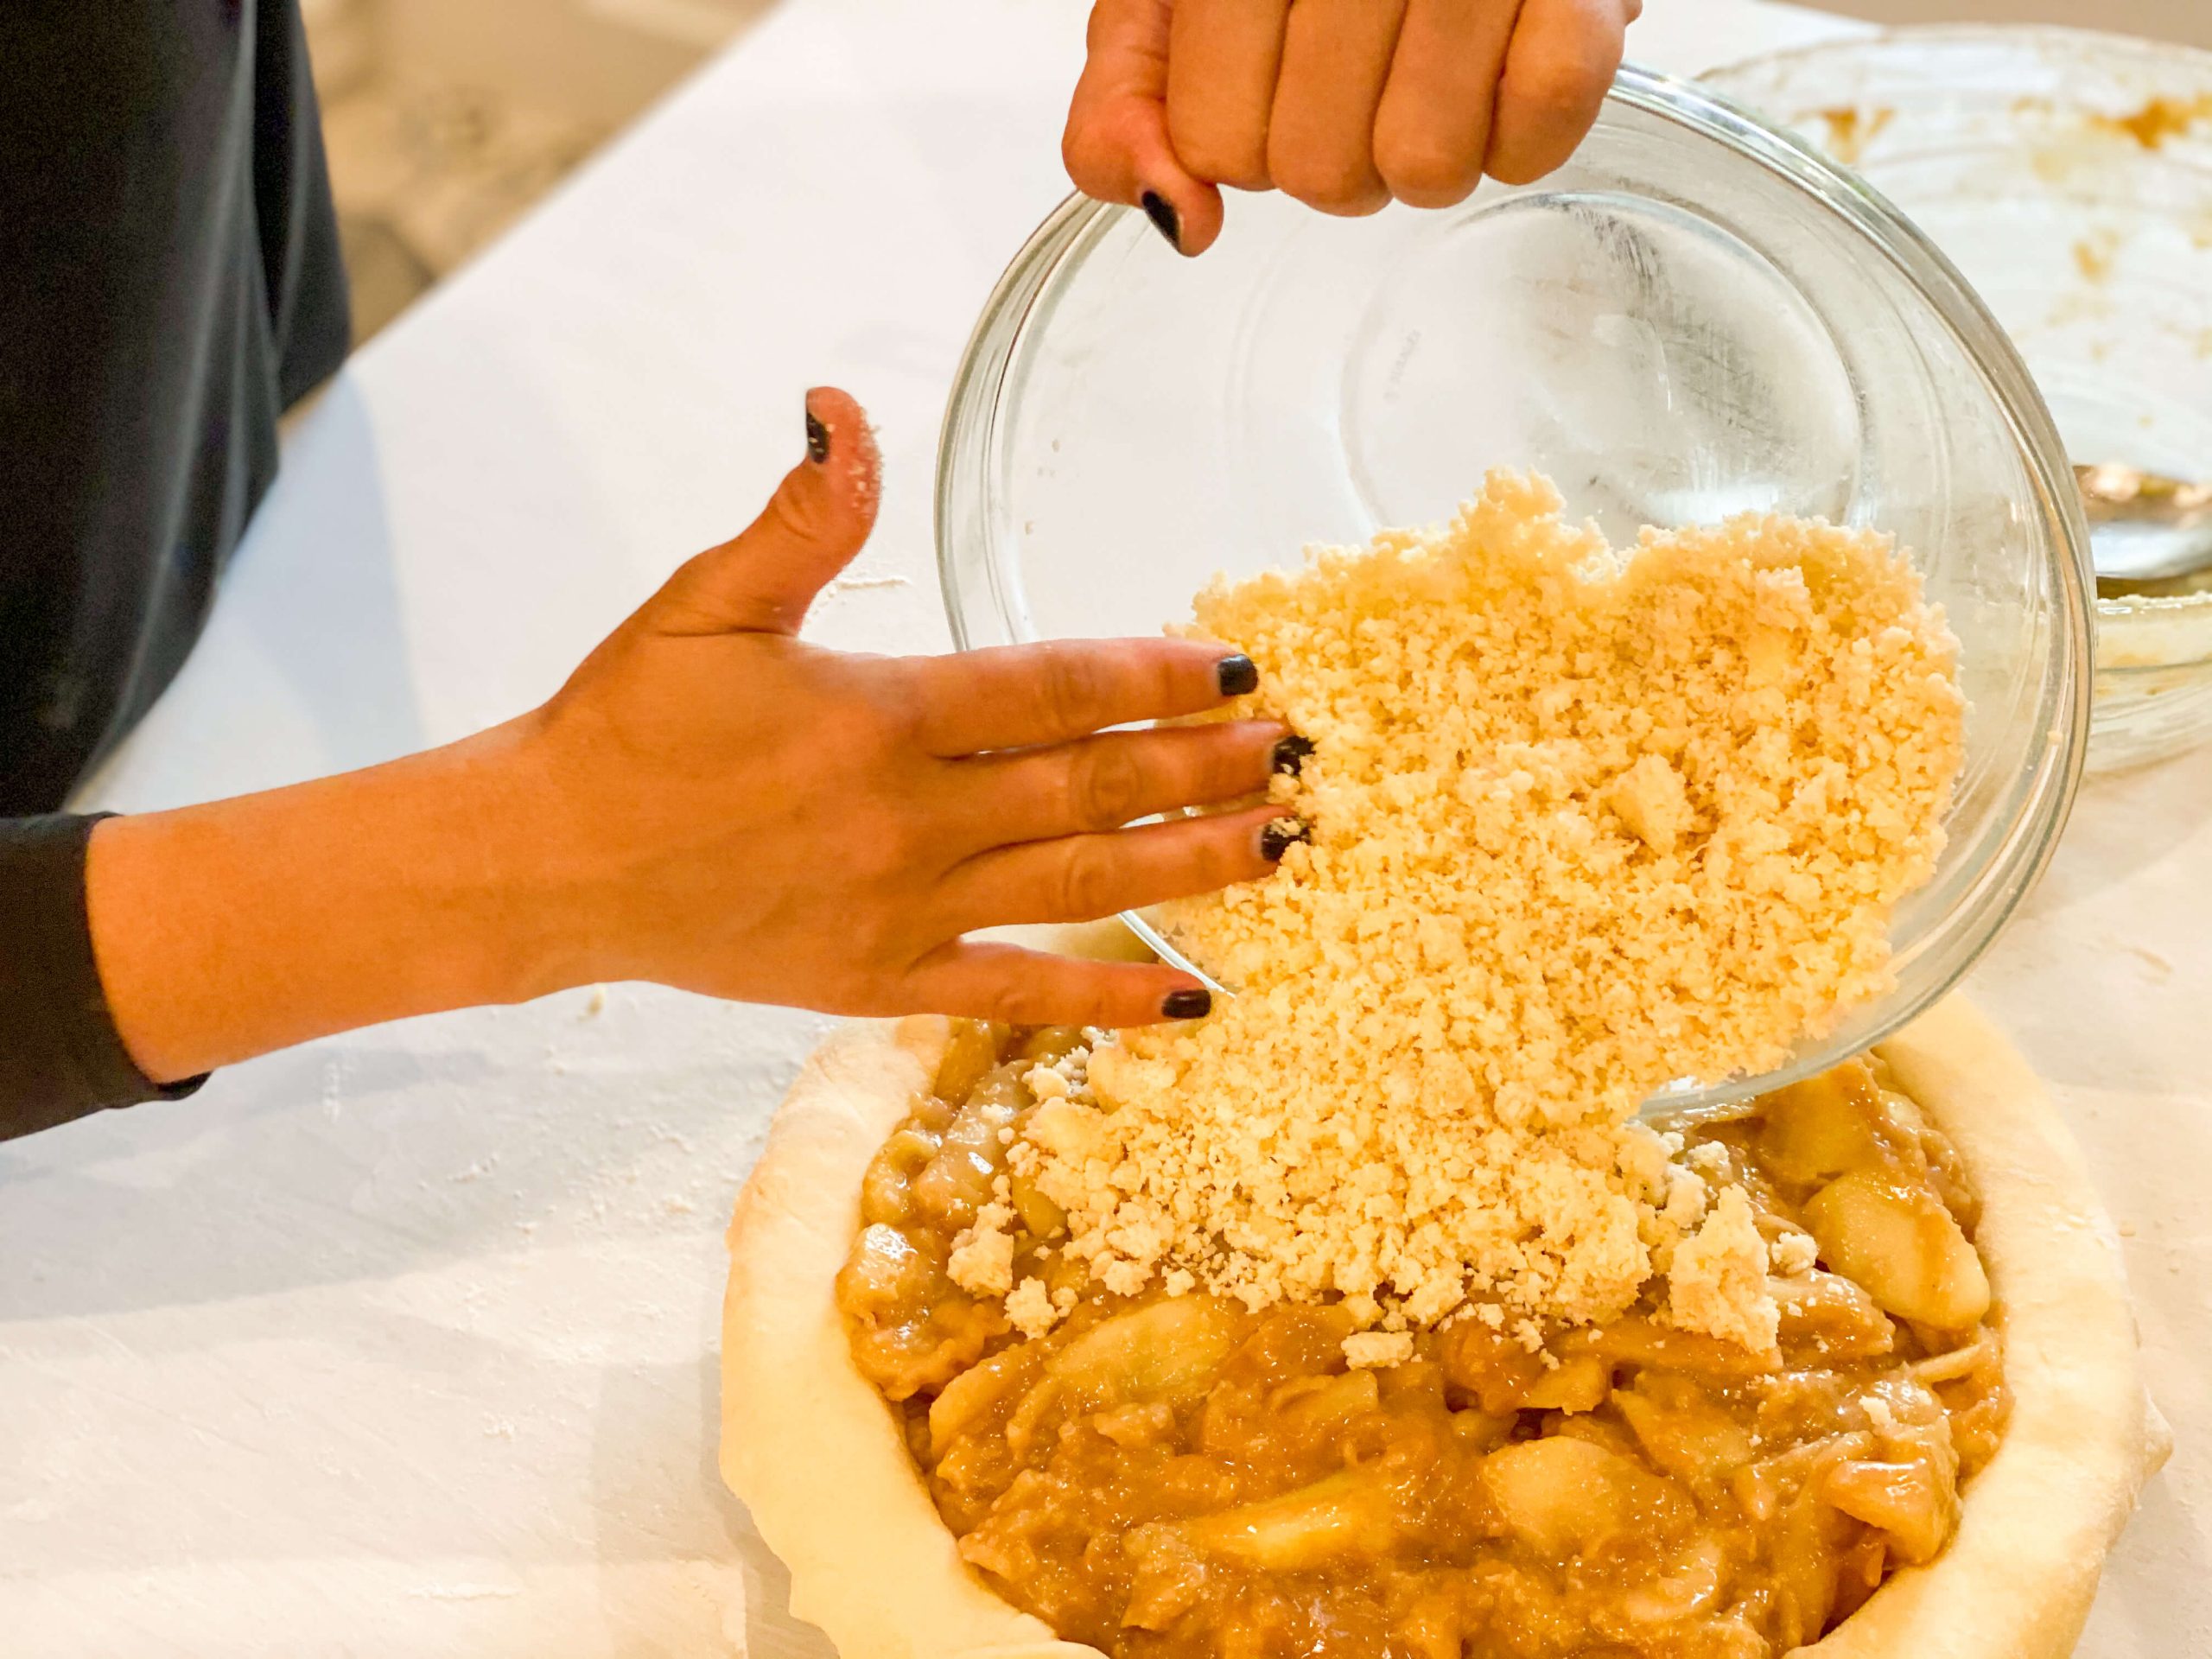 coconut crumble being poured on top of the cooked apples